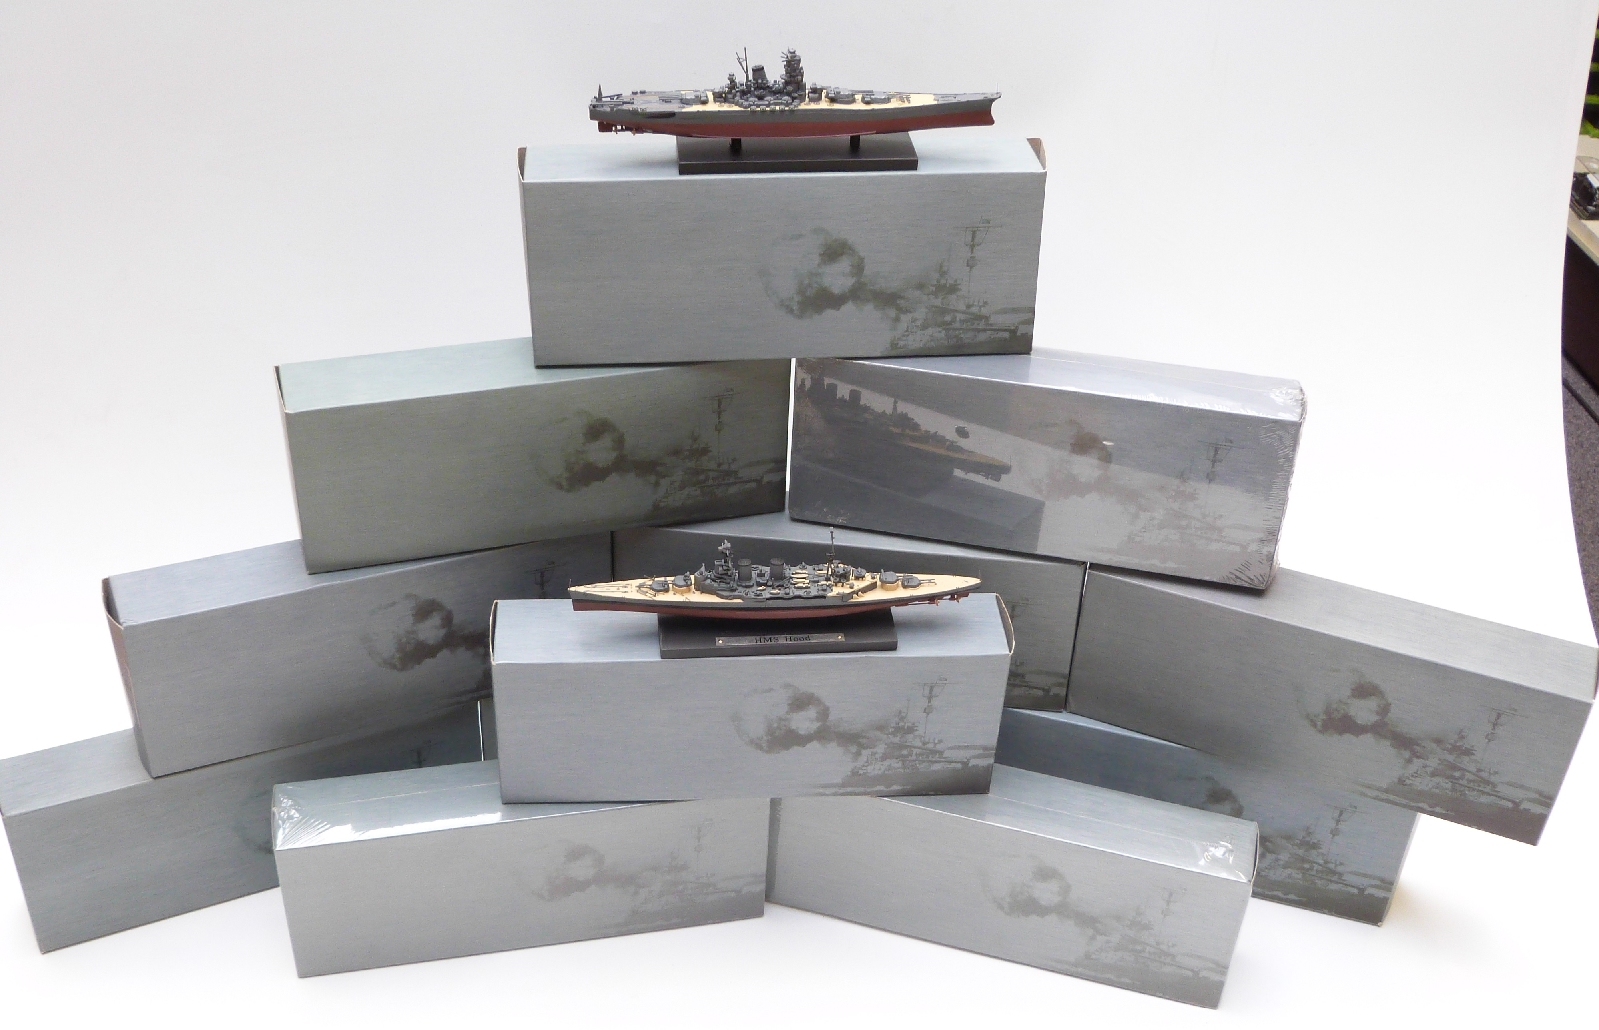 Twelves Atlas Editions diecast model ships, all in original boxes some sealed